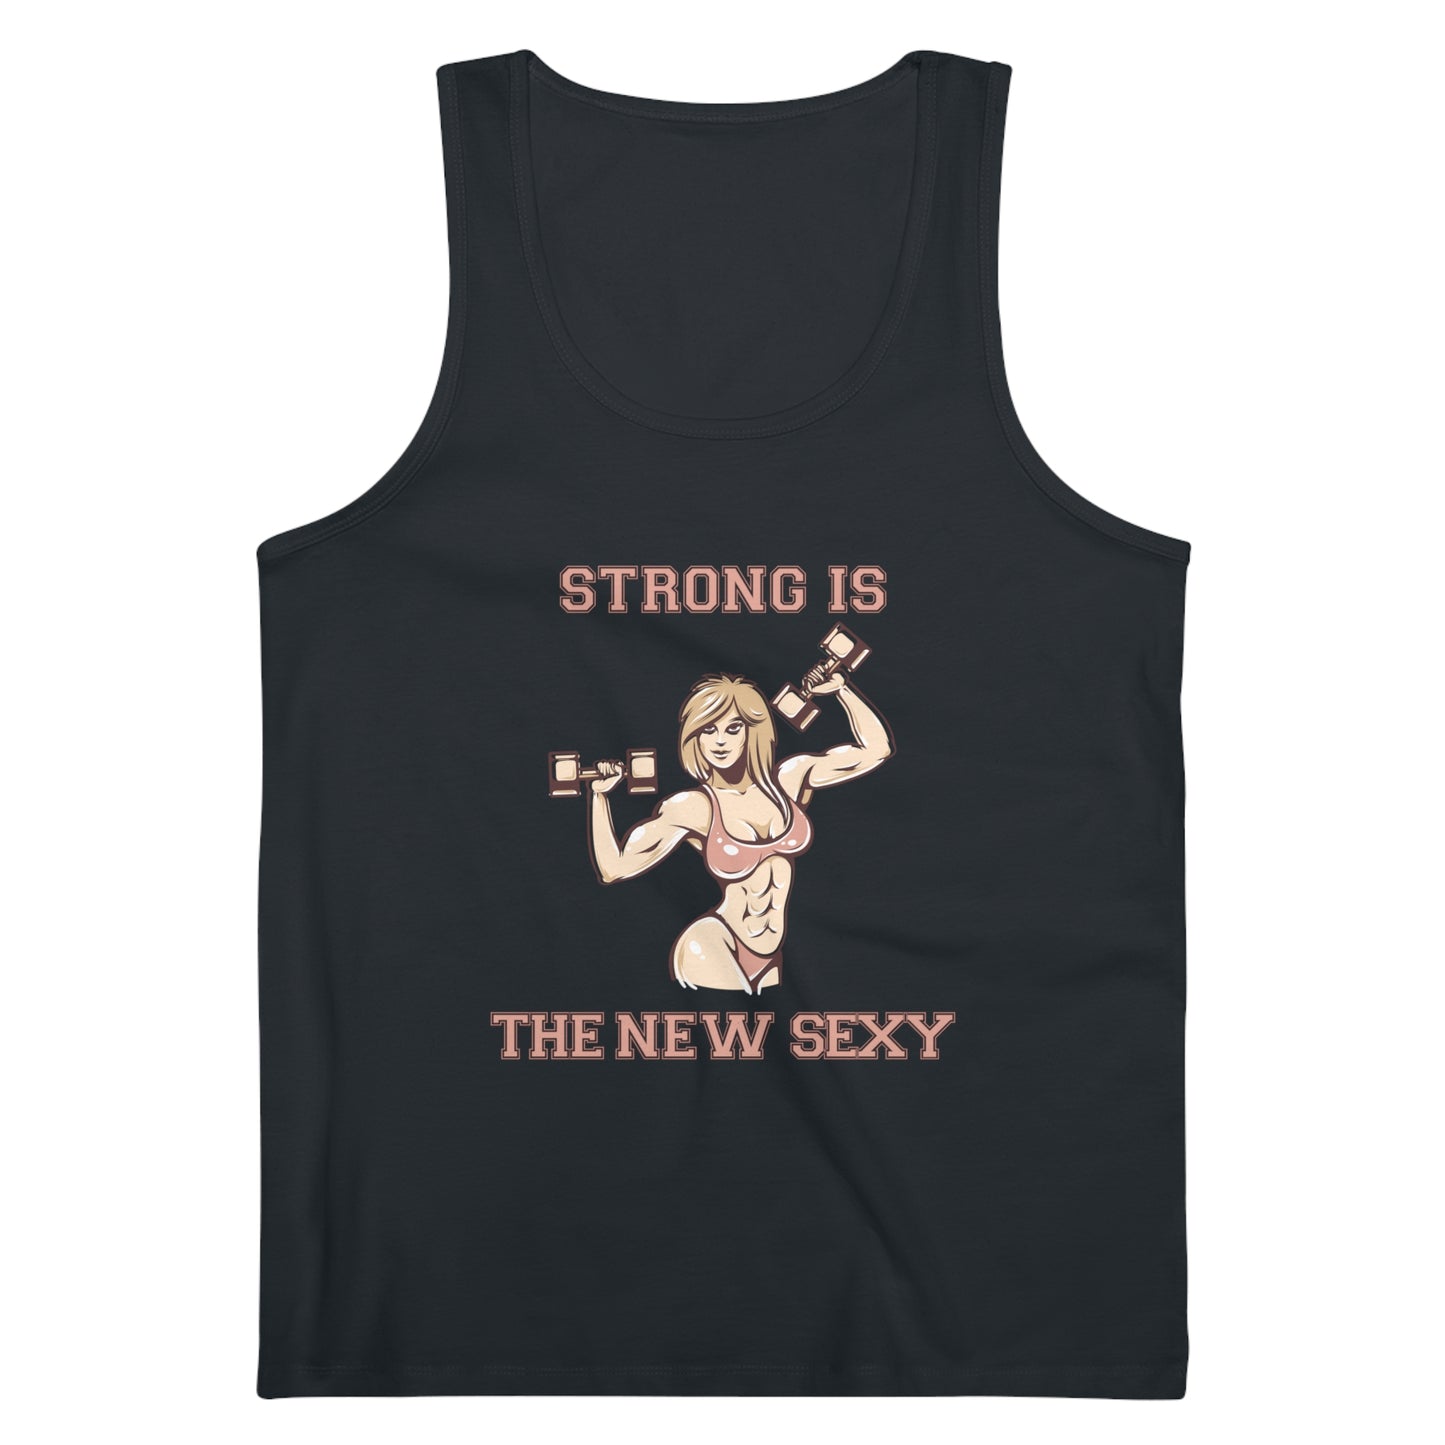 STRONG IS THE NEW SEXY x Tank